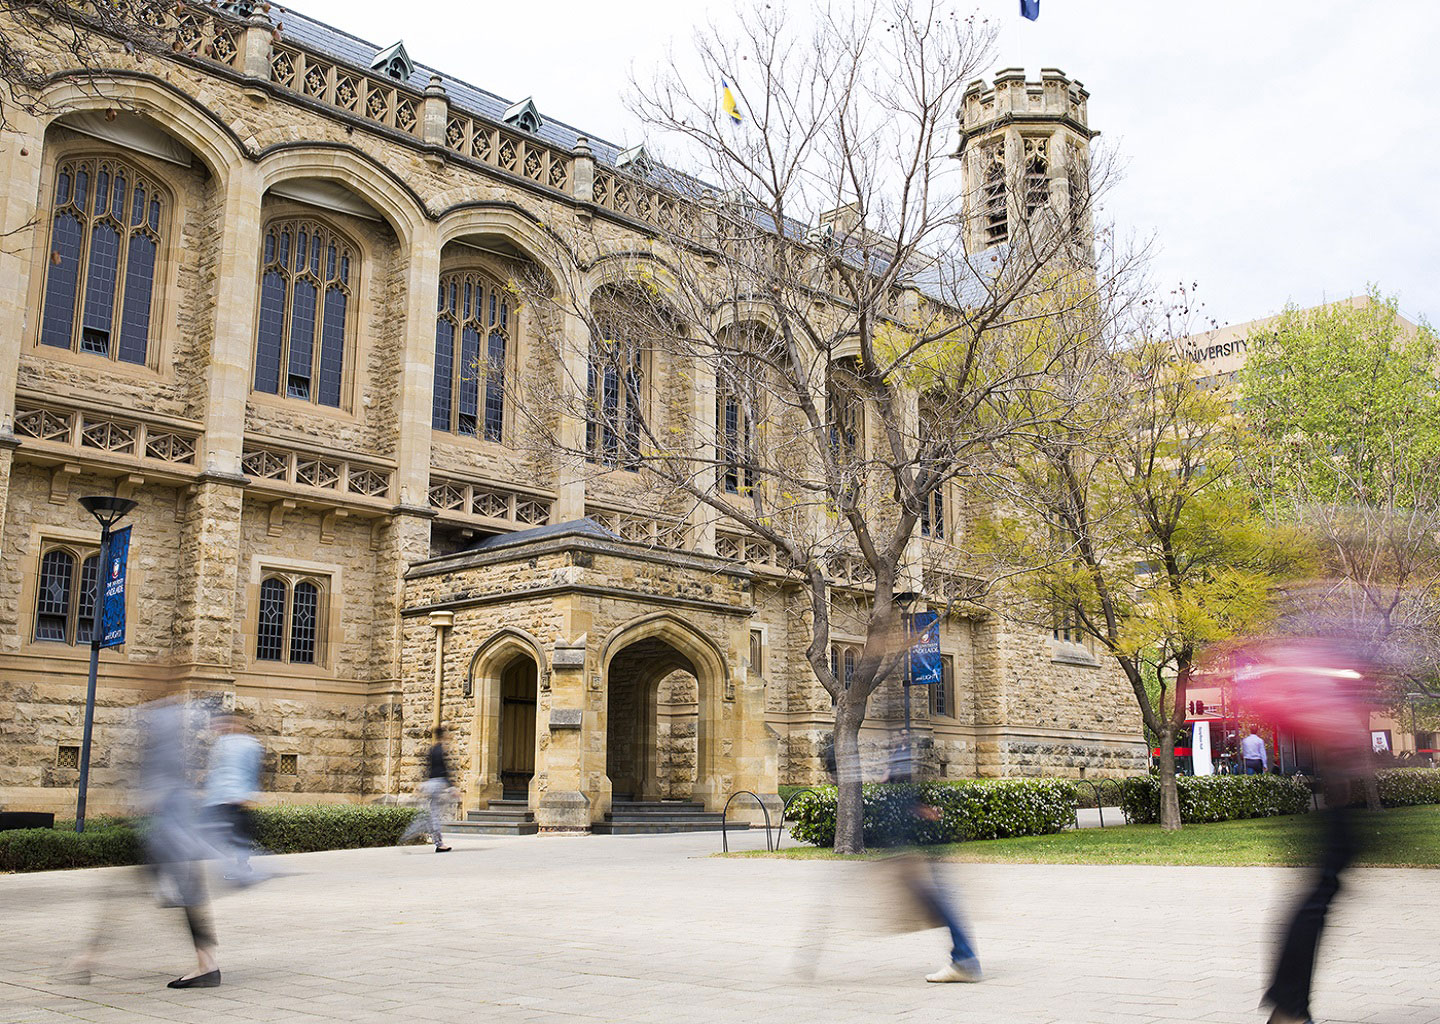 Information on courses; rankings & fees for The University of Adelaide